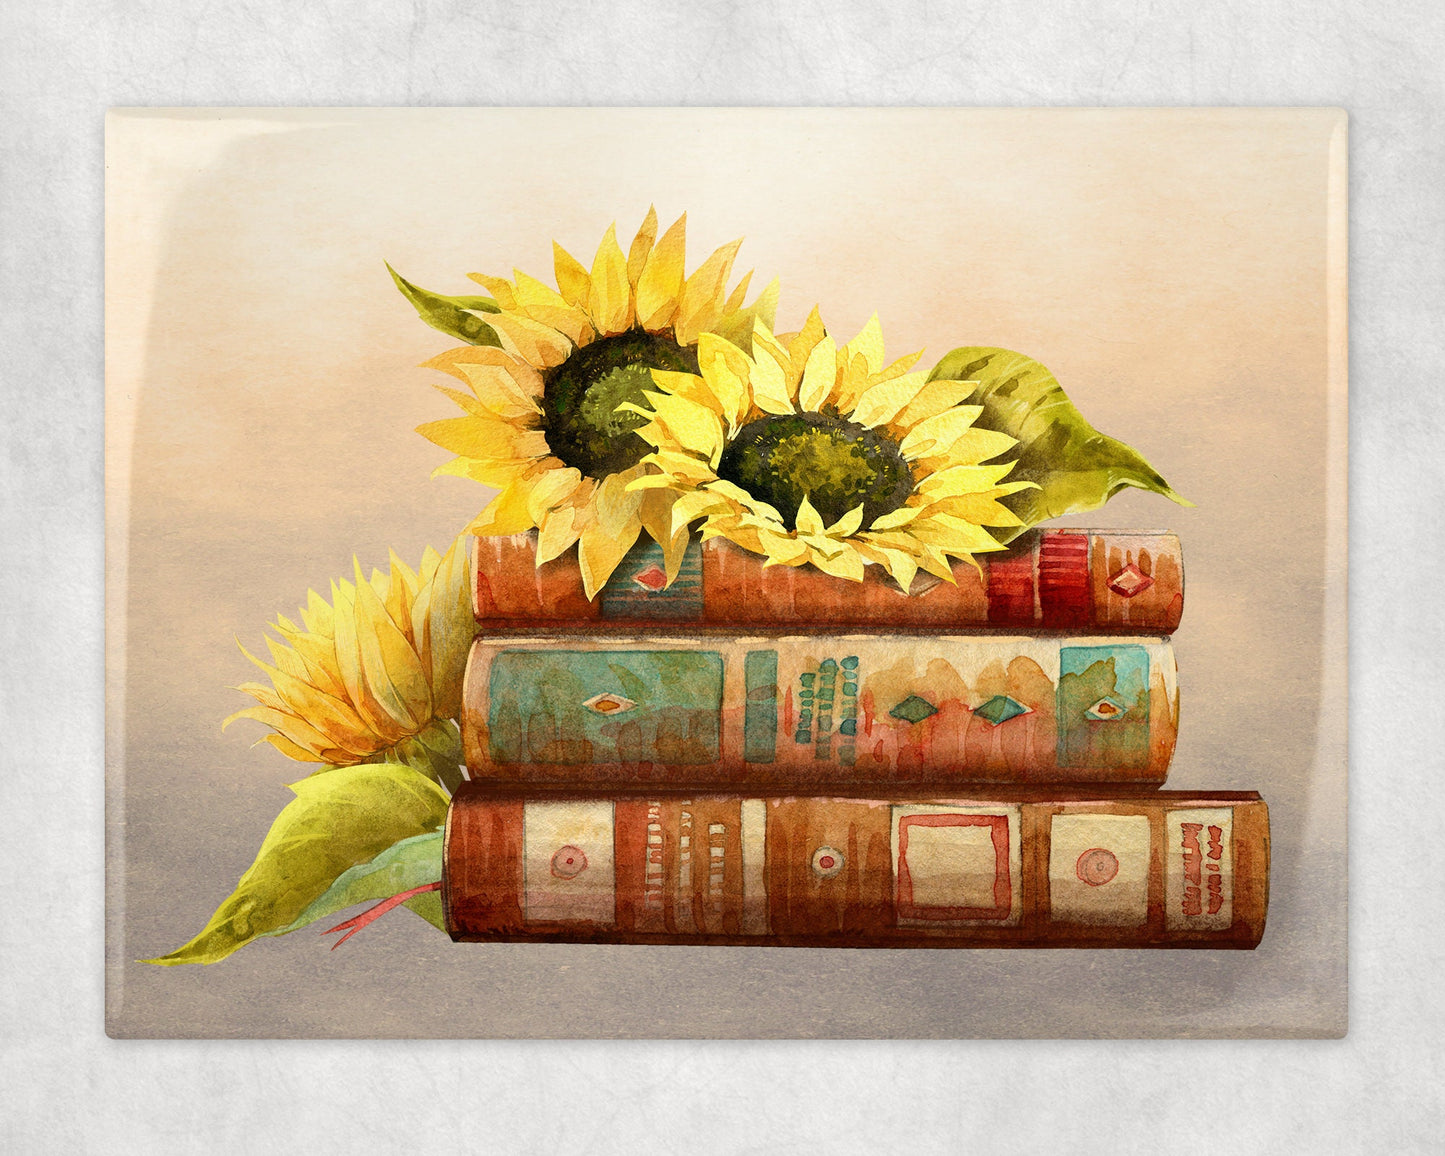 Autumn Sunflowers and Books Art Decorative Ceramic Tile with Optional Easel Back - 6x8 inches